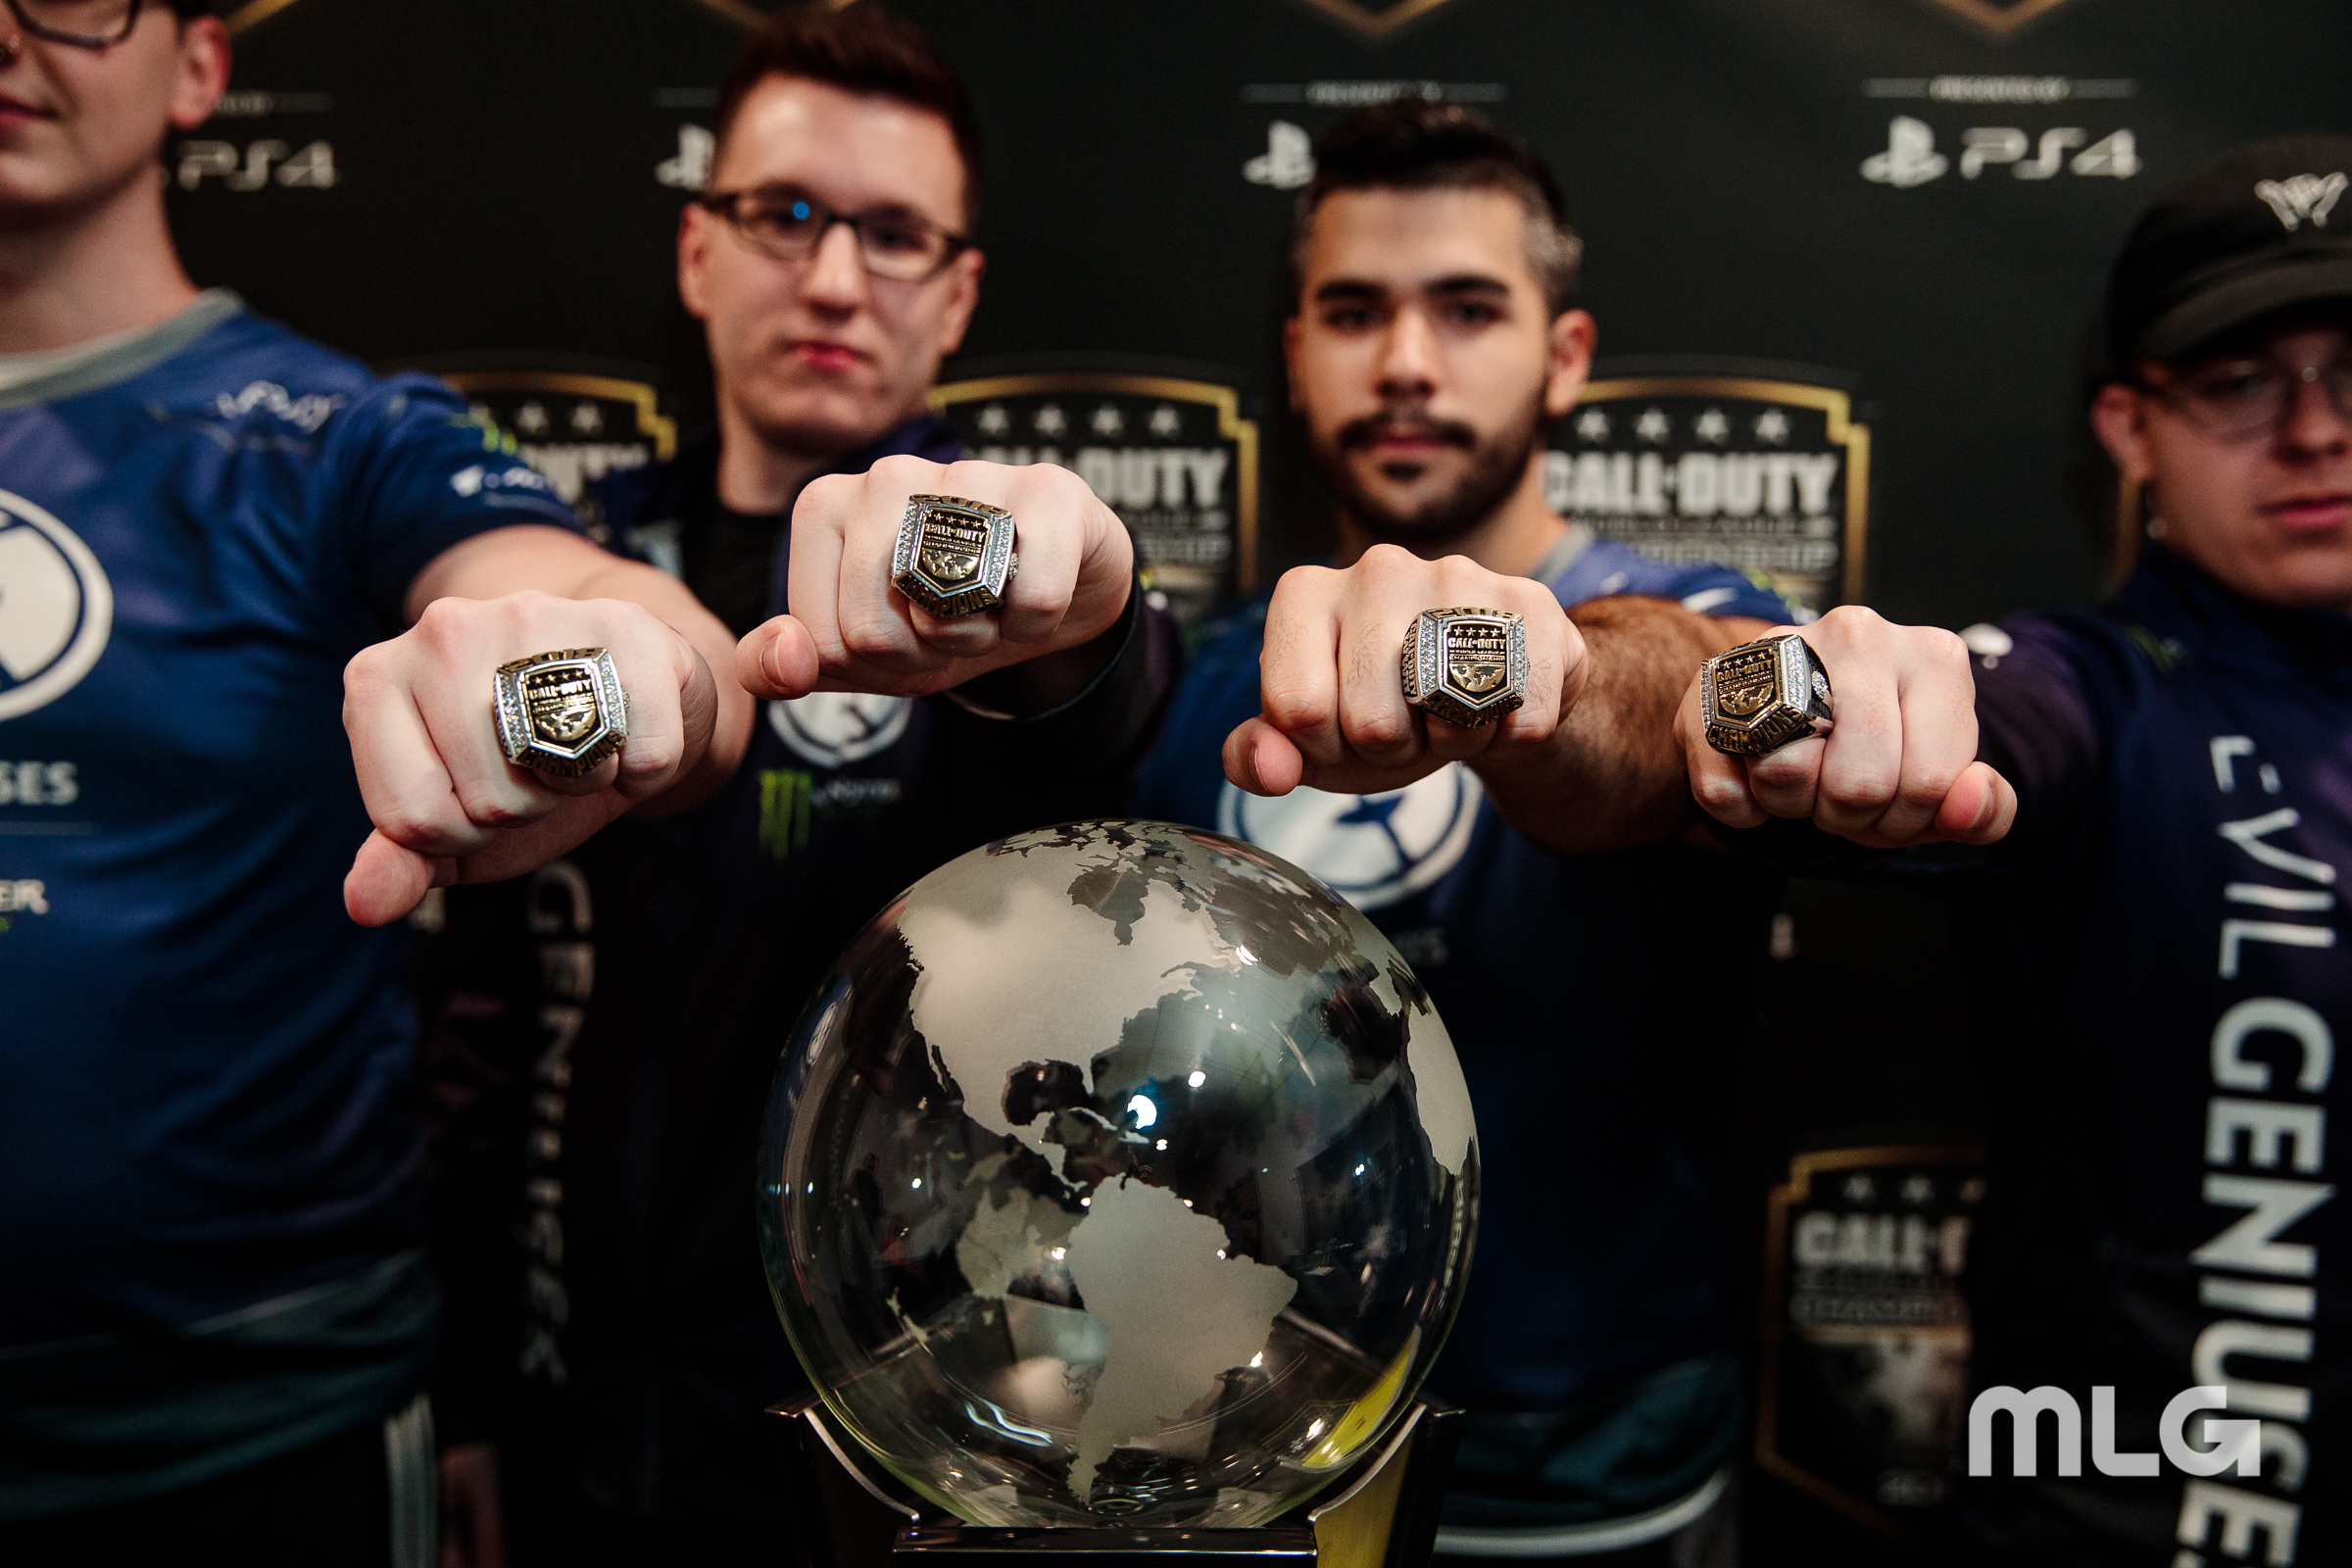 All Teams Qualified for CoD Champs 2019 | Dot Esports